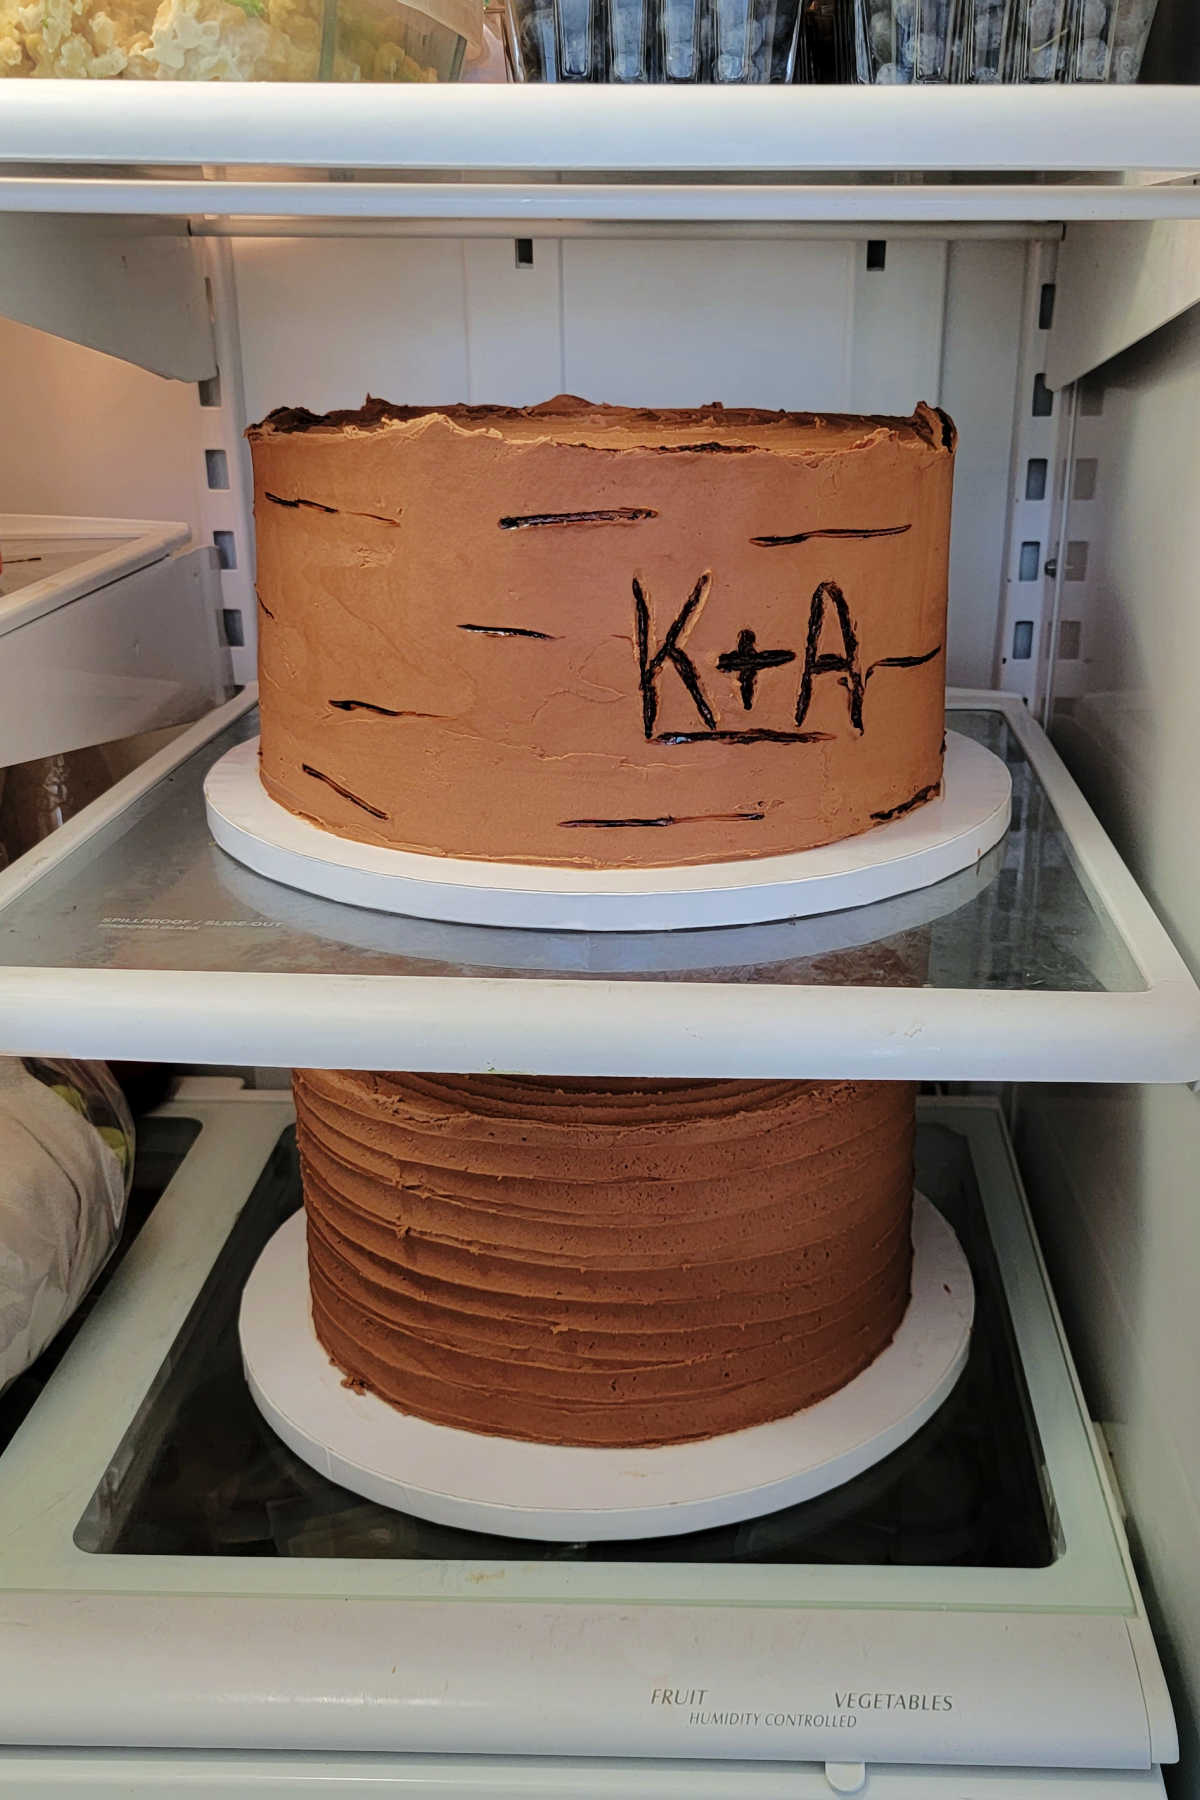 Two 10 inch chocolate cakes chilling in the refrigerator.